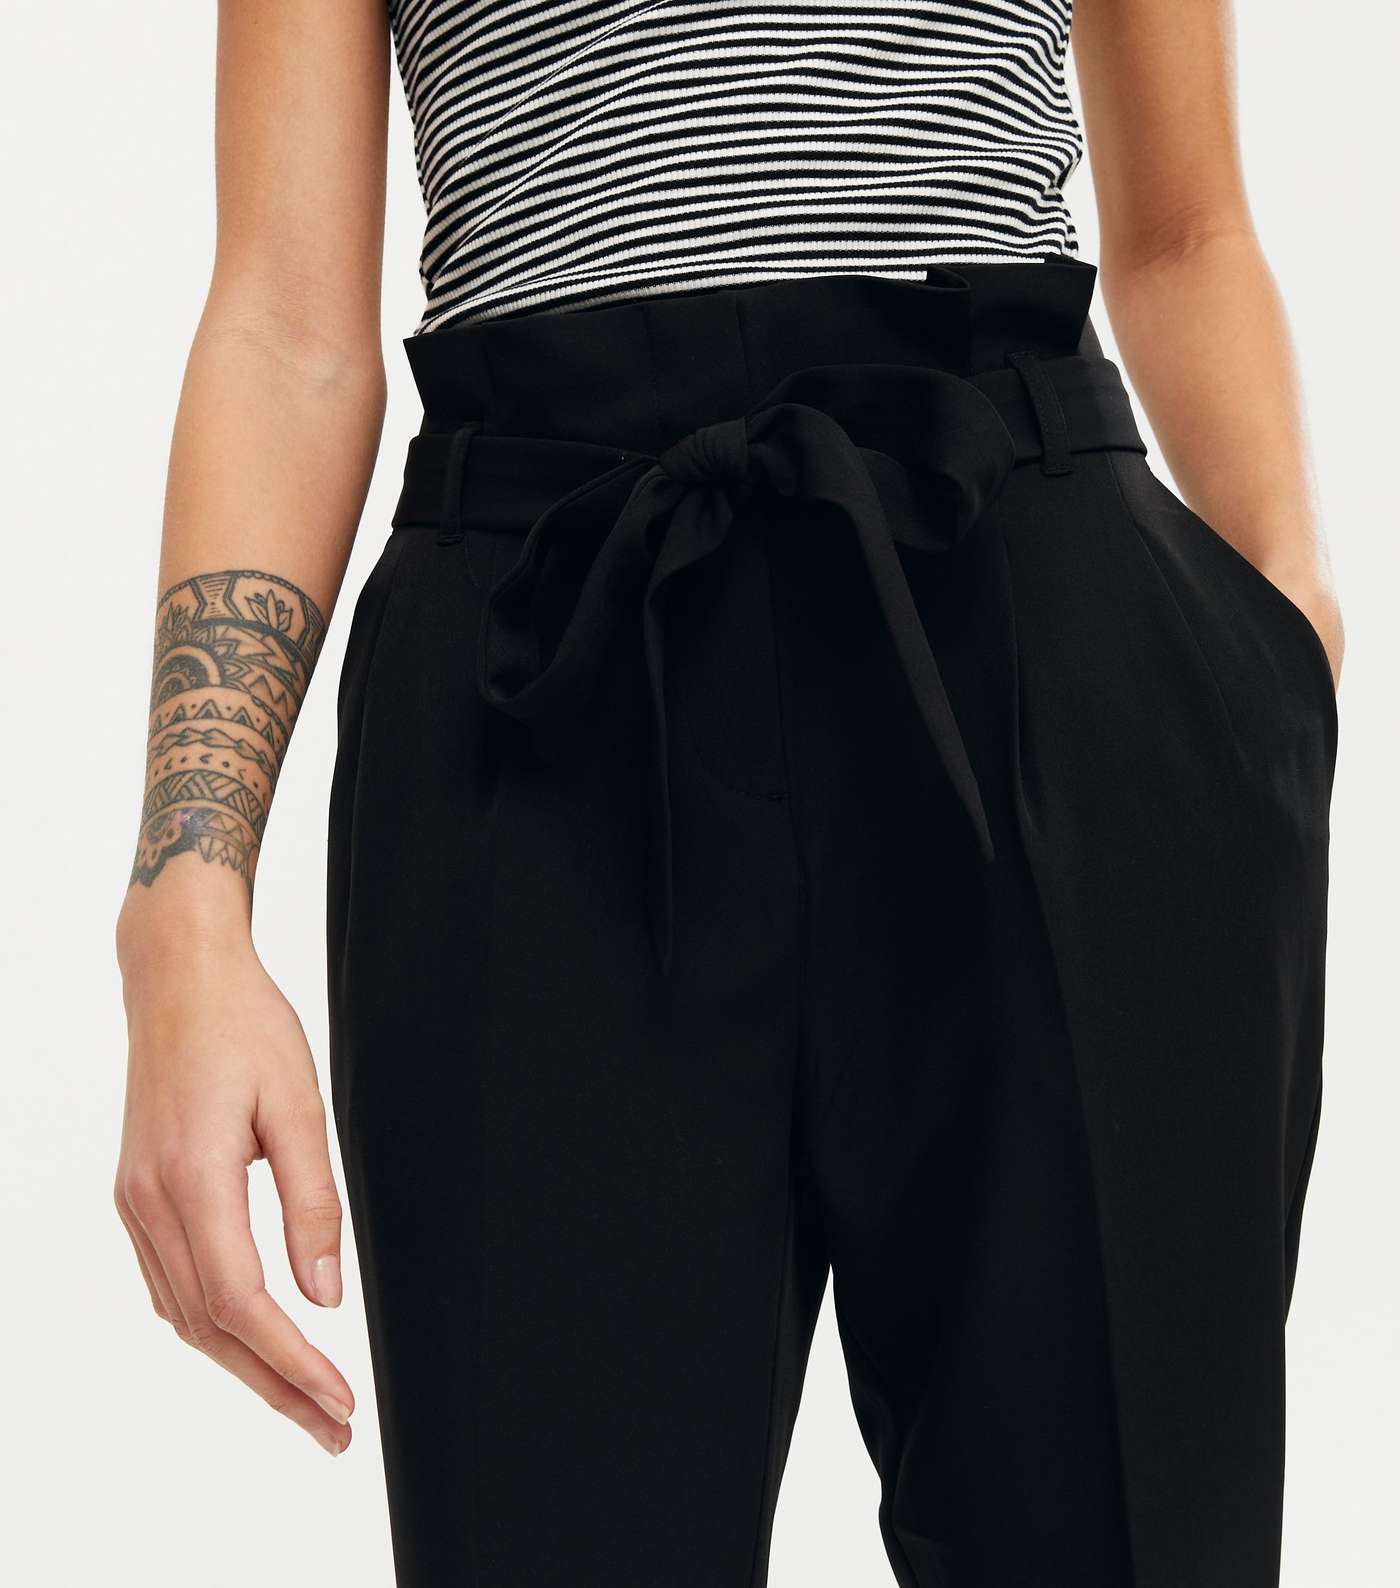 Petite Black Belted High Waist Trousers Image 4